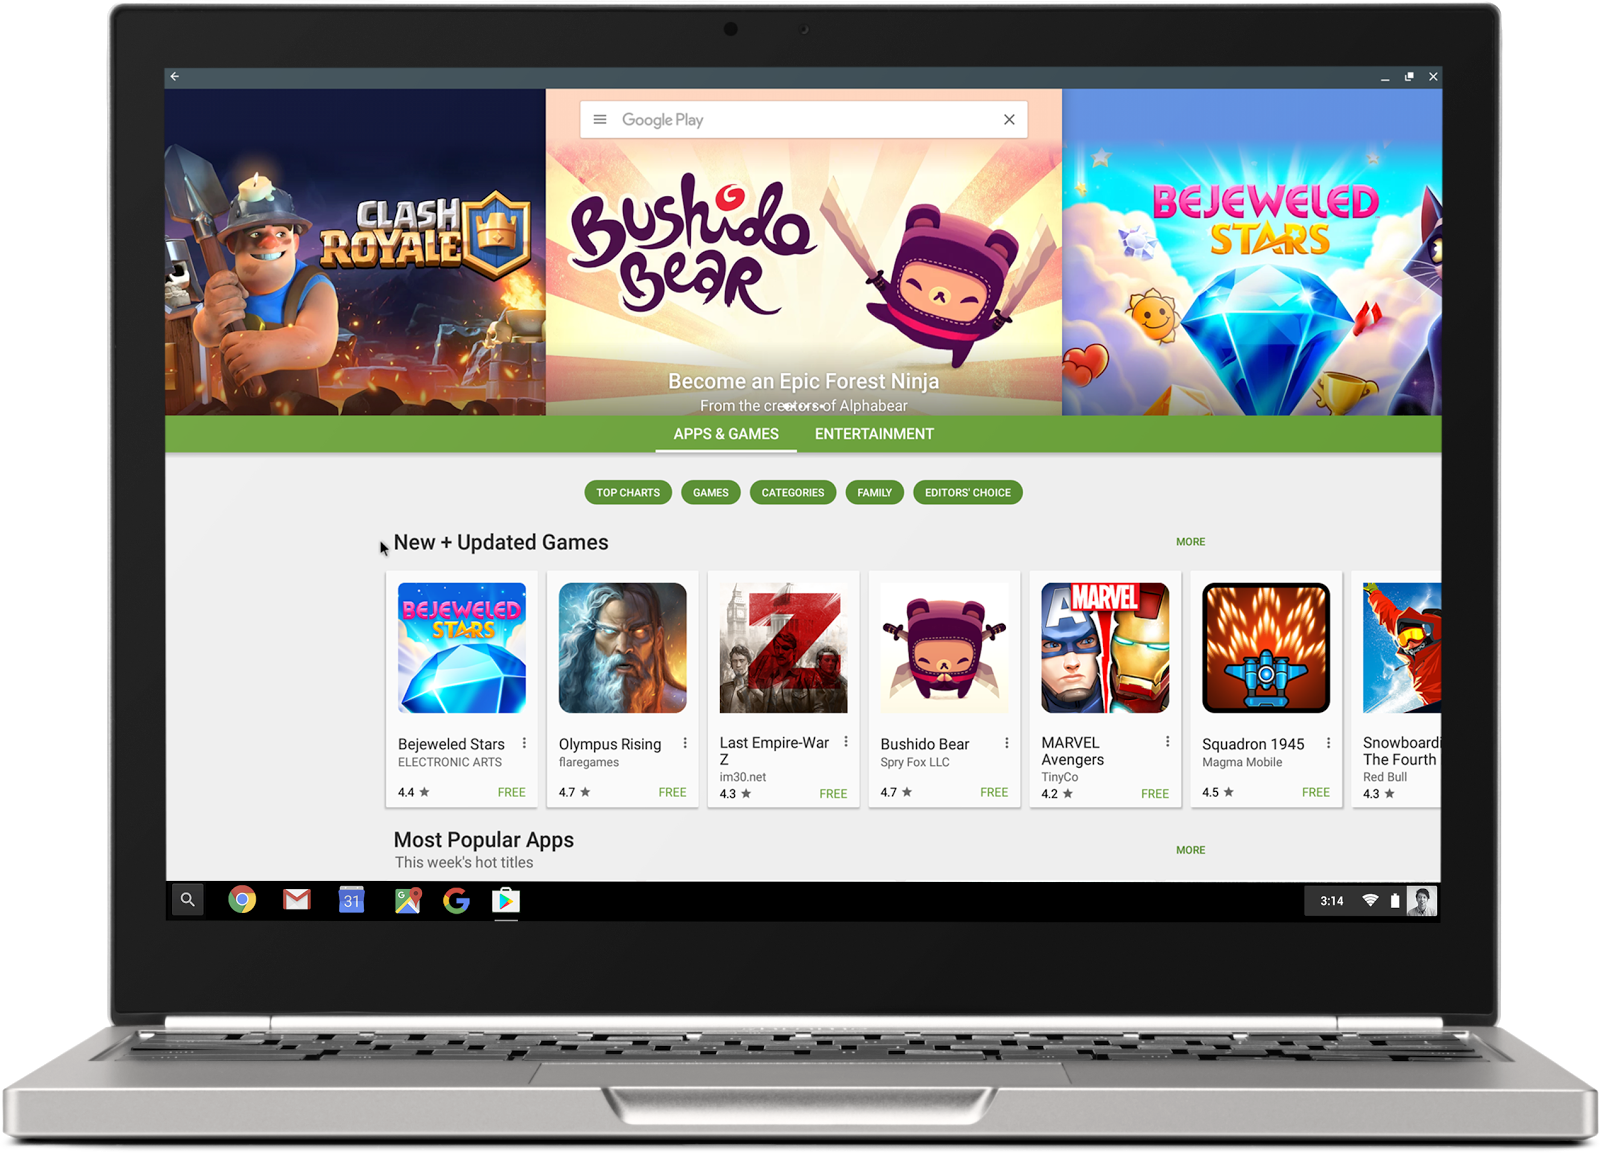 The Google Play store, coming to a Chromebook near you